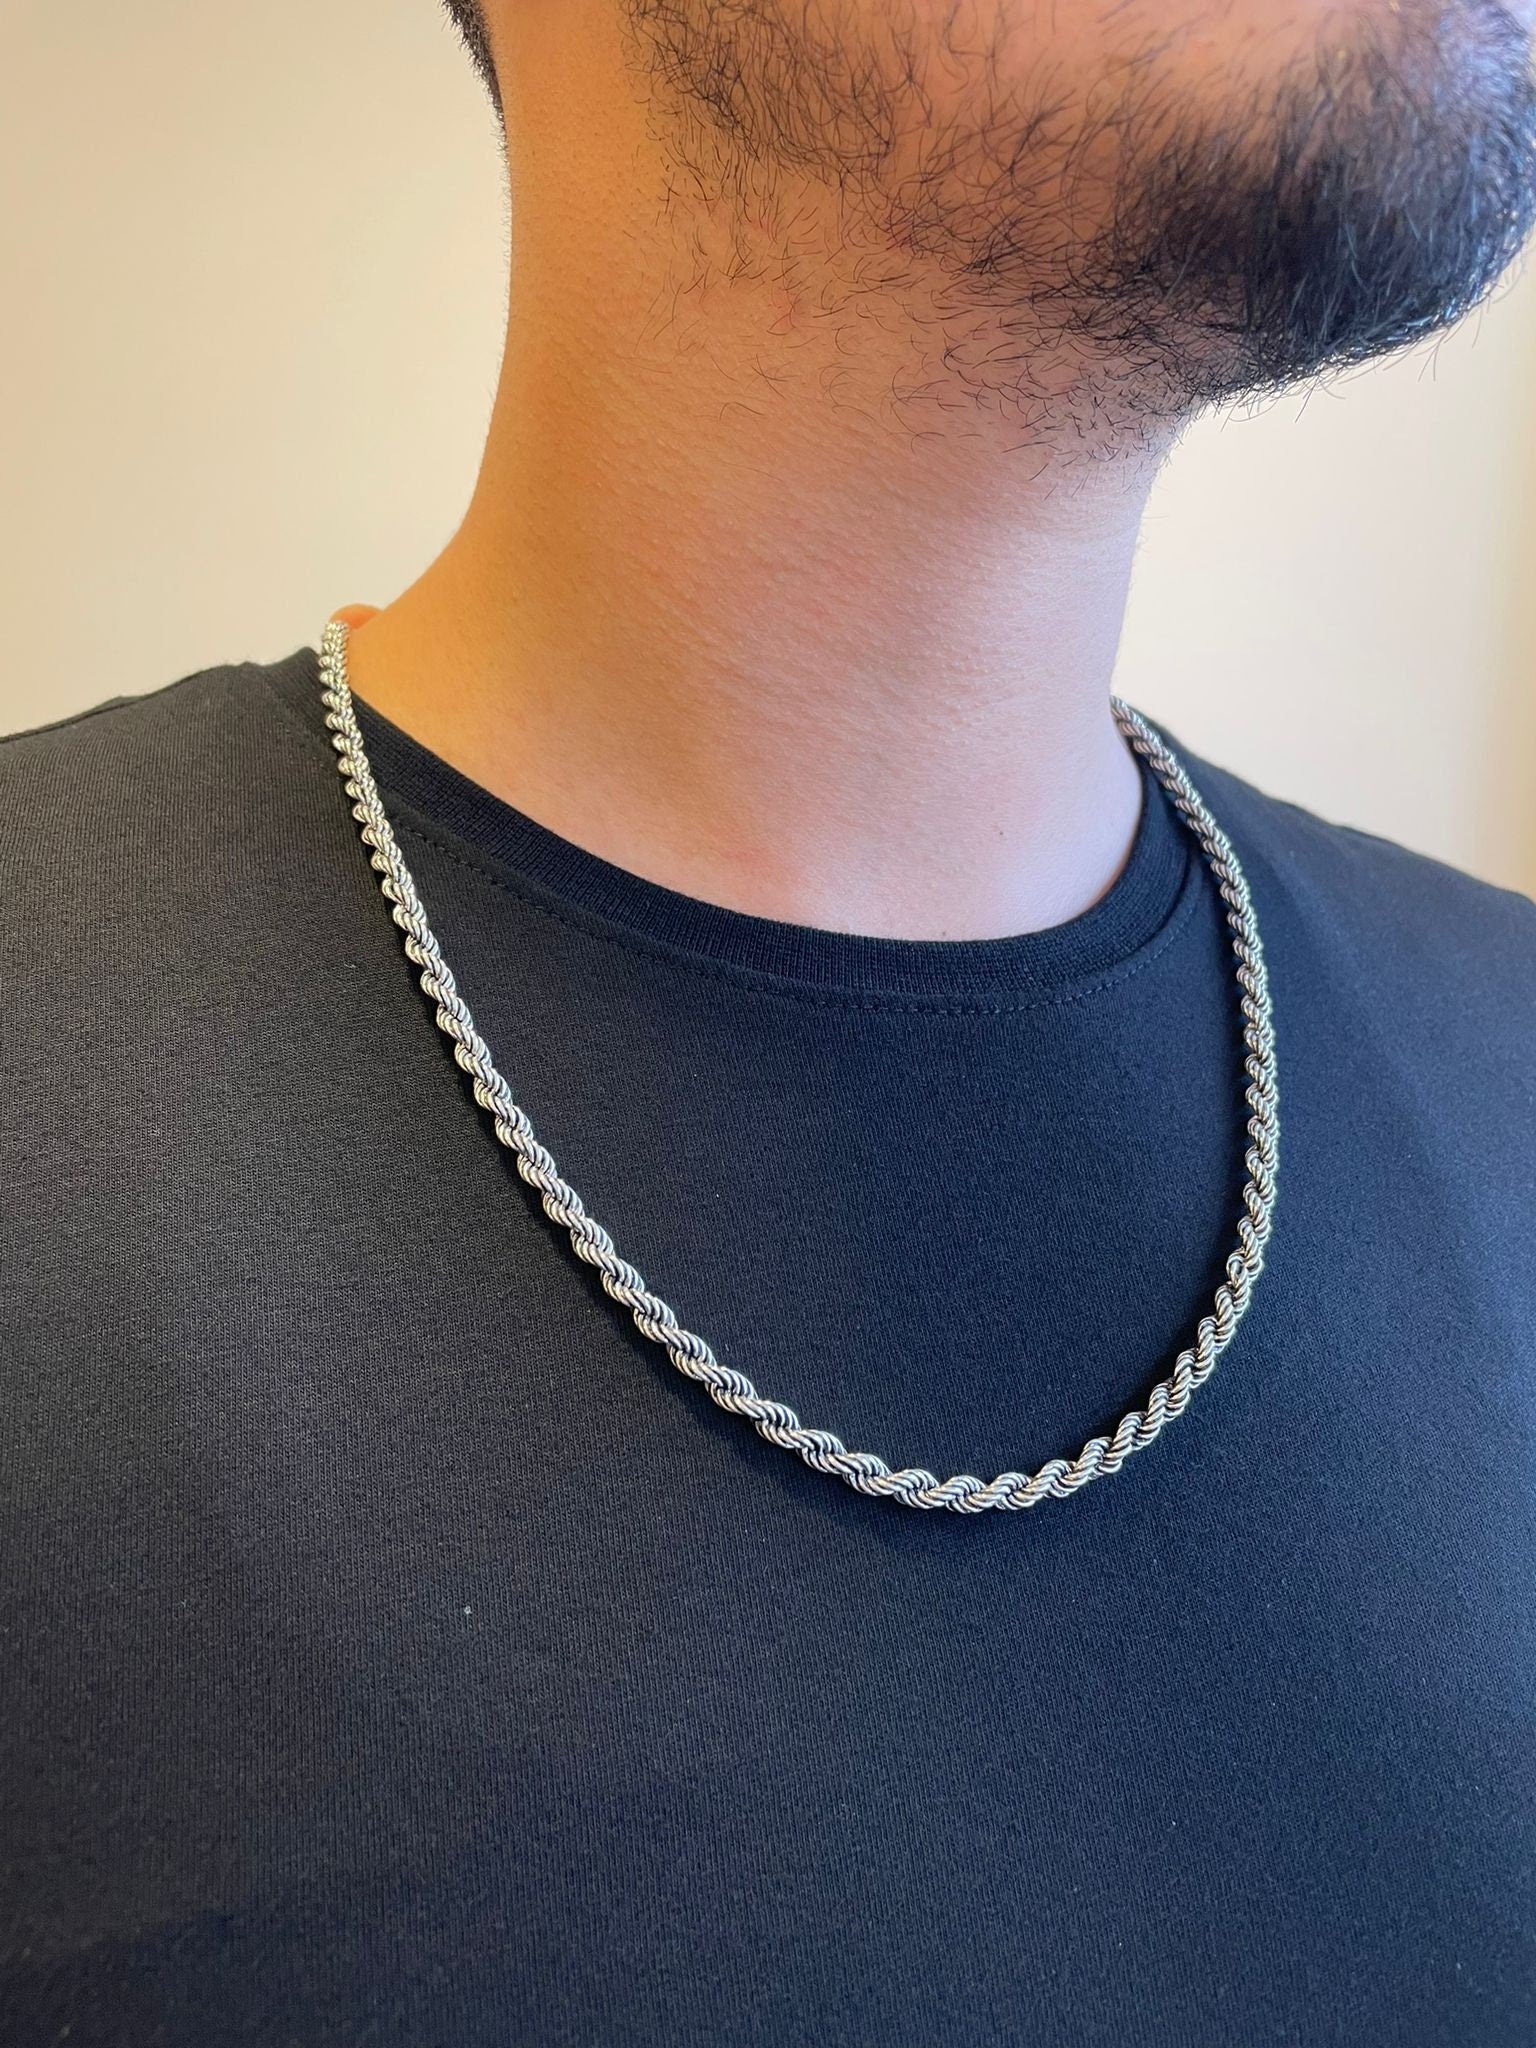 Men's Jewellery Stylish Rice Shape Link Style Stainless Steel Neck Chain  For Boys and Men